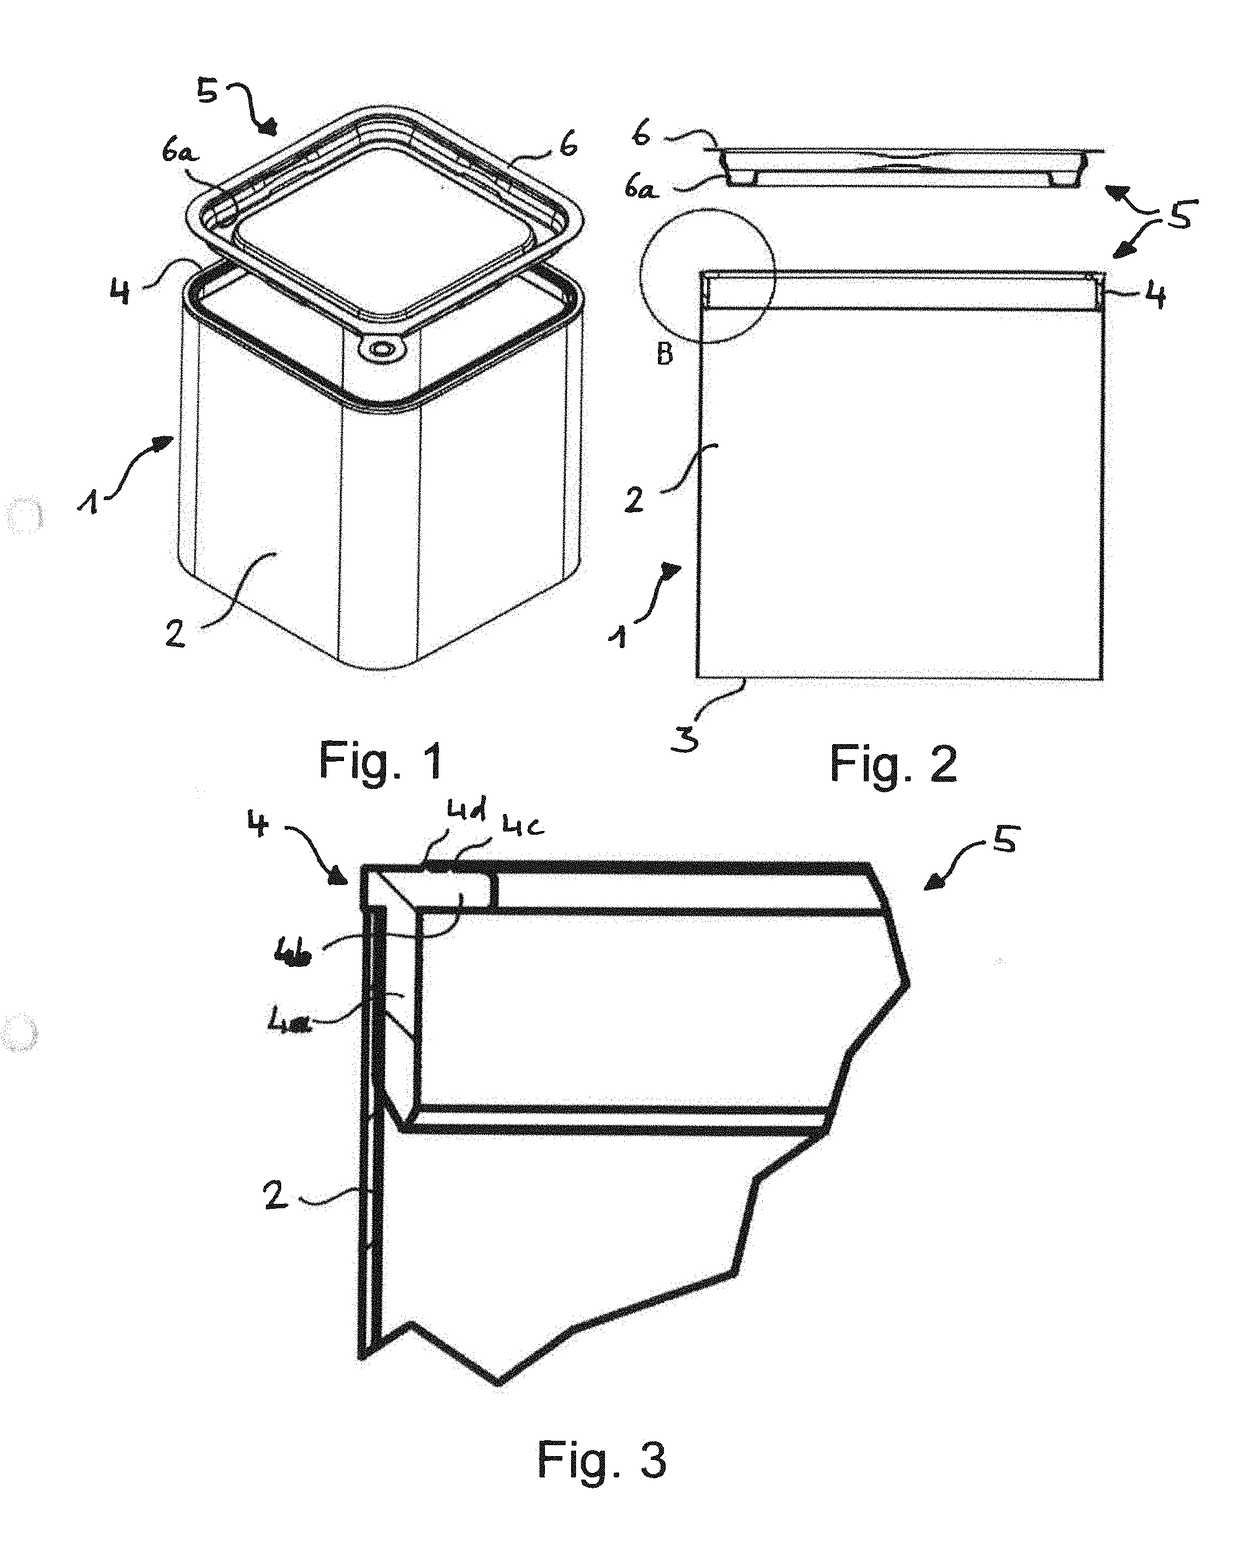 Lid assembly for a packing container, packing container with such a lid assembly, and method for manufacturing same